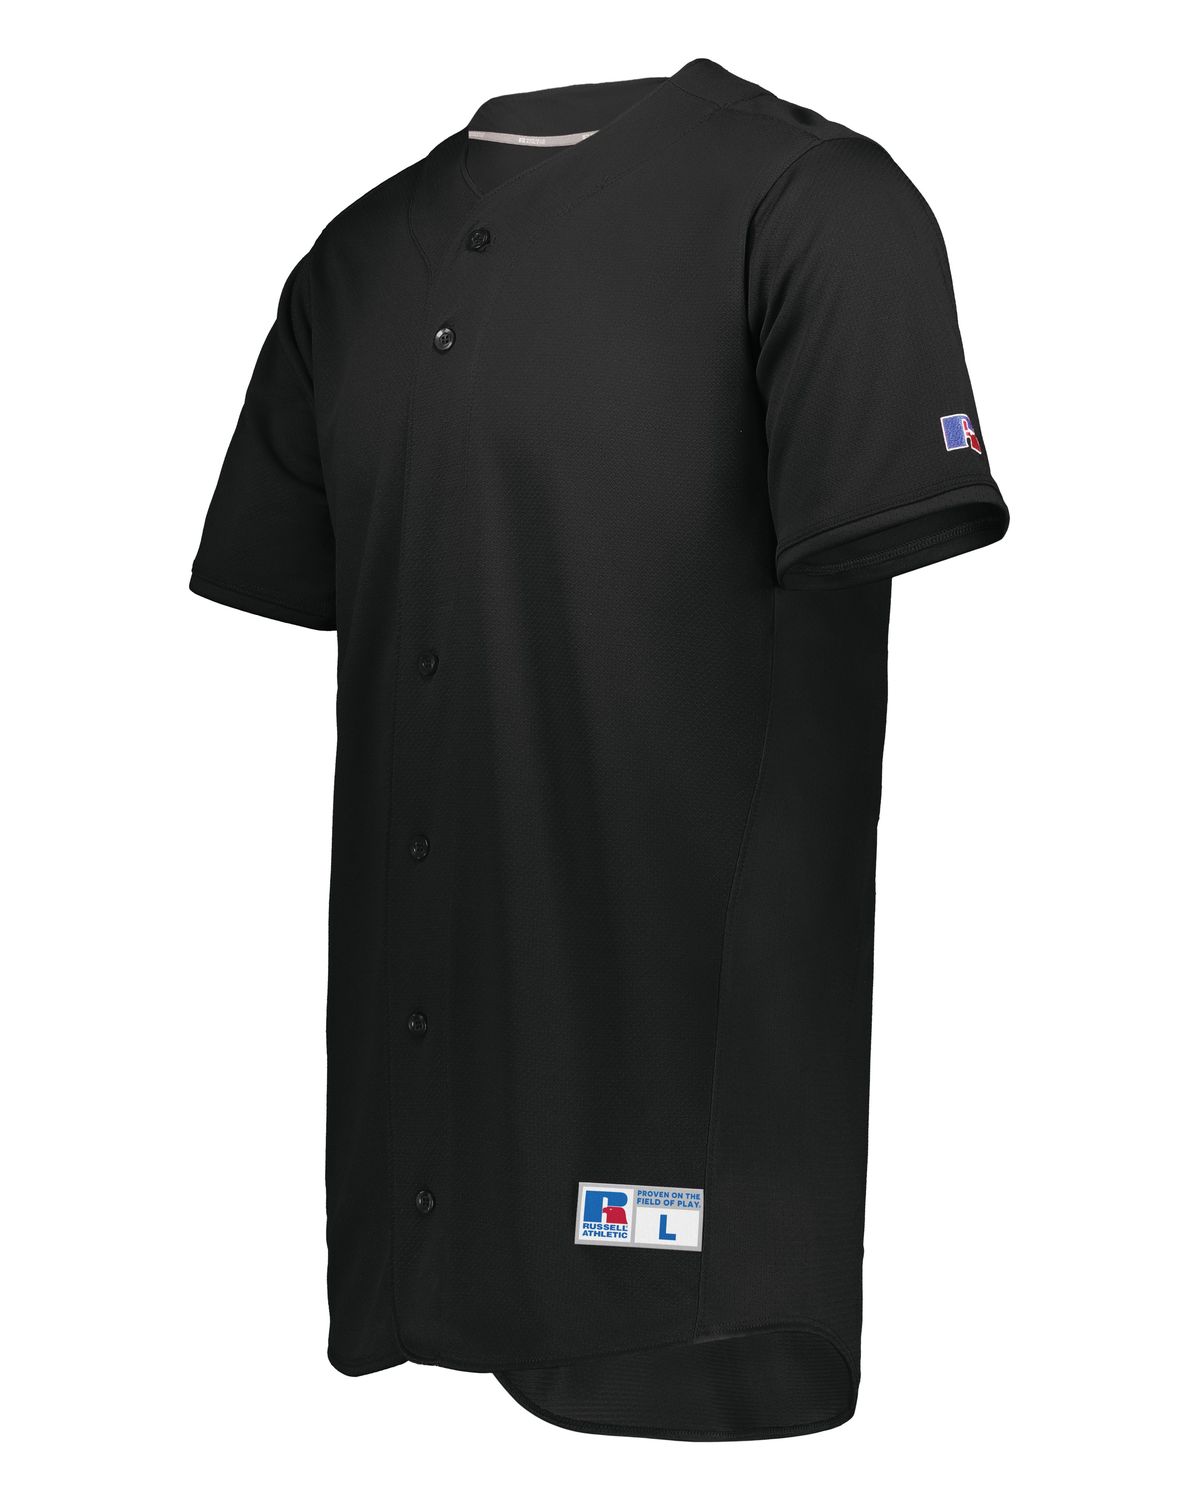 'Russell Athletic 235JMM Five tool full button front baseball jersey'